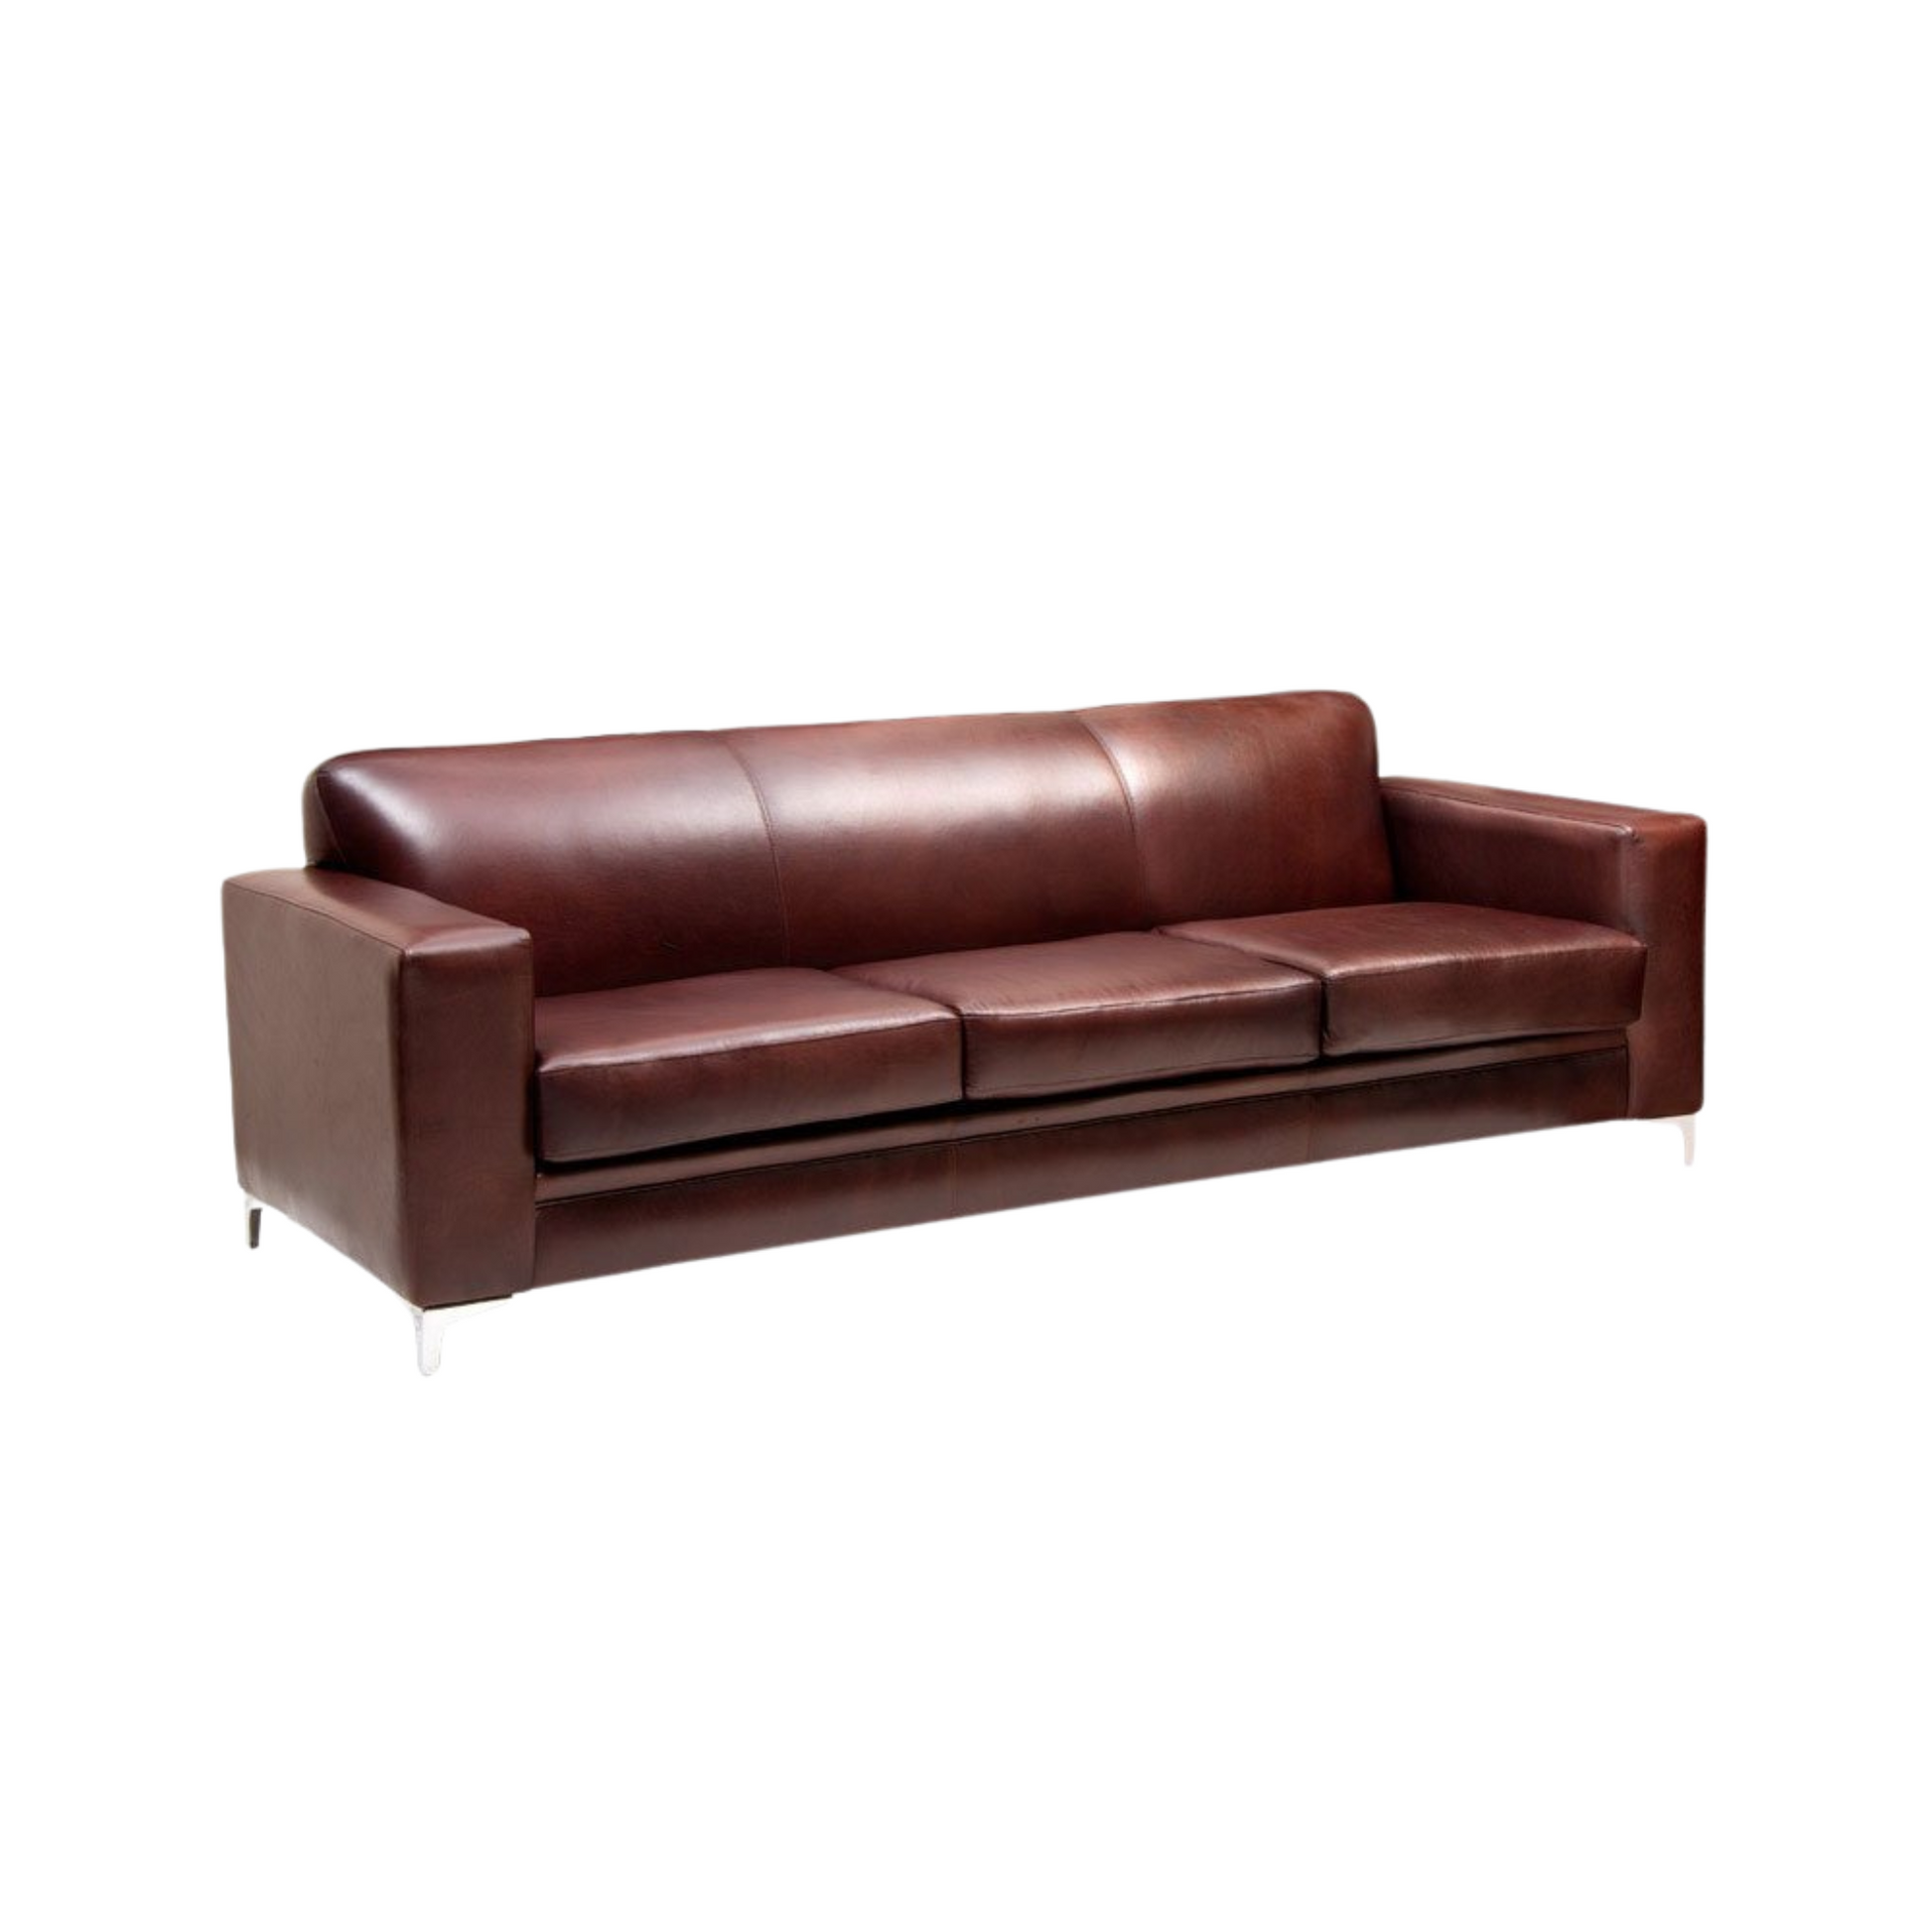 Manhattan Loft Sofa – Embrace relaxation and style with our Manhattan Loft Sofa design. With support in the seat and a spring-fixed back, it's the perfect choice for various activities such as watching, listening, reading, or entertaining.  Customize your experience with any custom size you desire and a wide range of premium leathers and fabrics, capturing your own personal style. Each piece is custom manufactured for a truly unique and tailored addition to your living space.